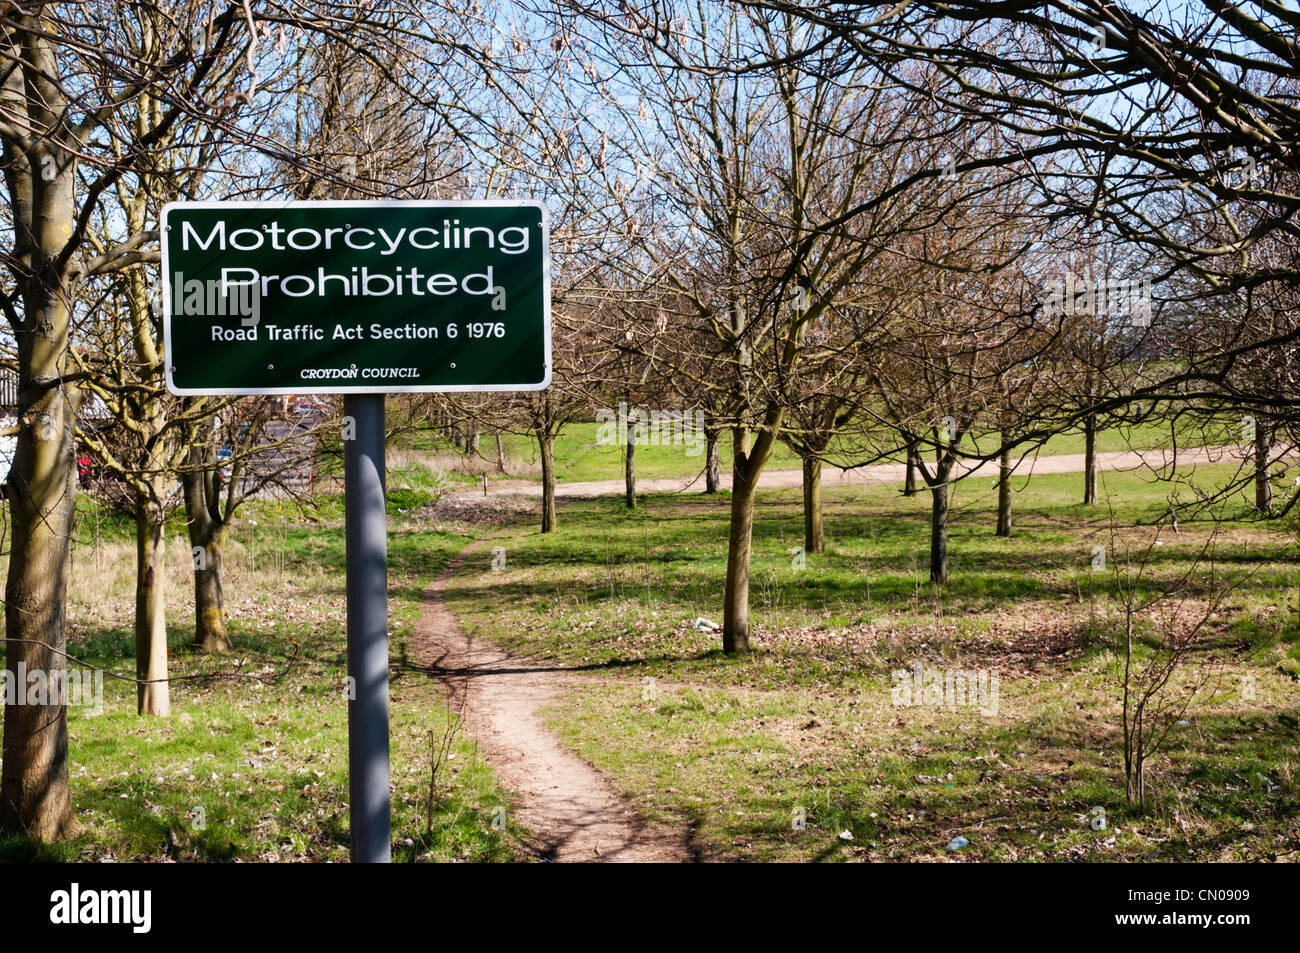 A sign prohibiting Motorcycling under s6 of the Road Traffic Act 1976 on the Roundshaw Open Space, Croydon. Stock Photo